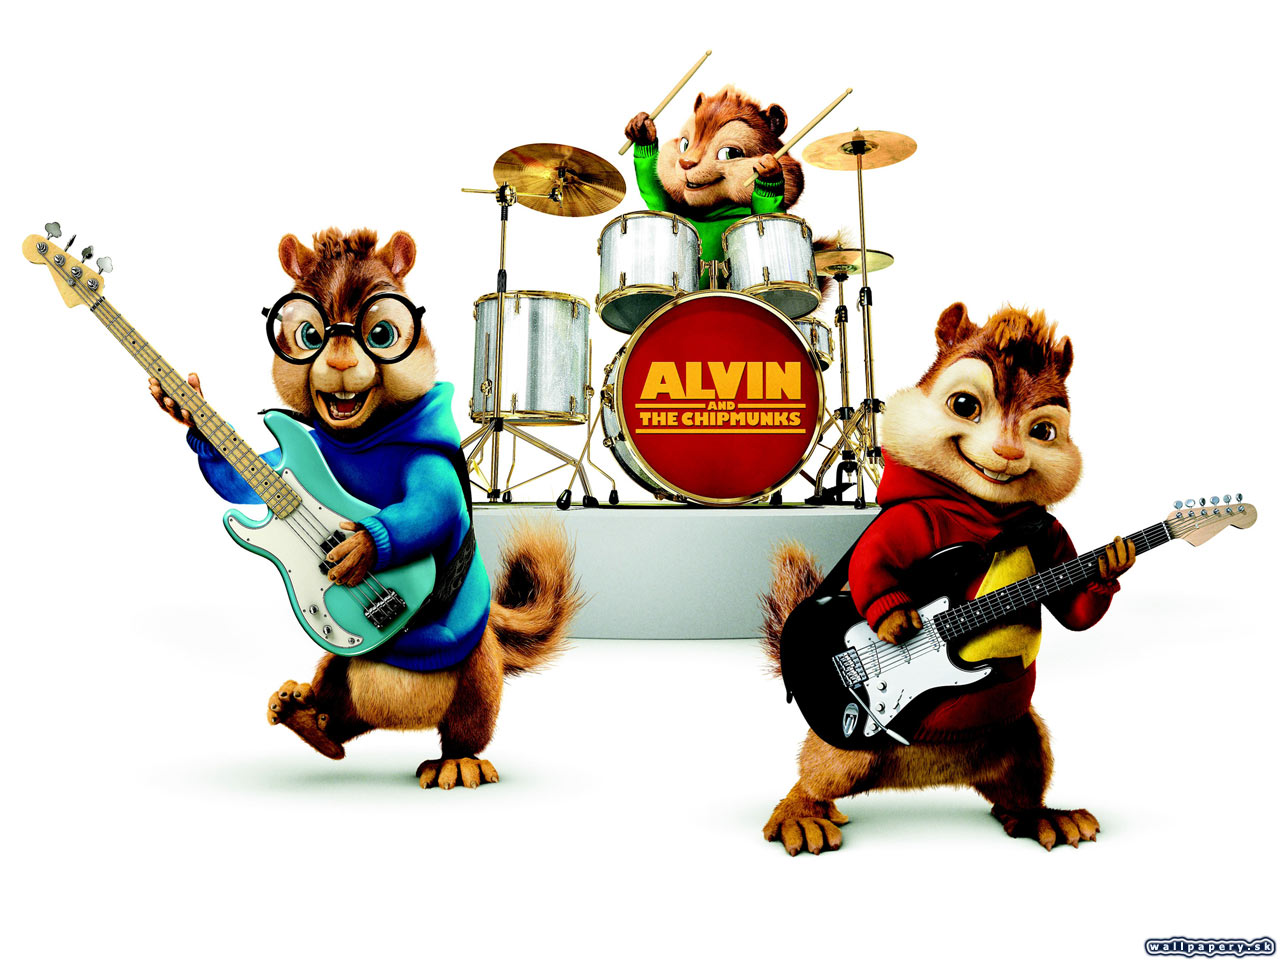 Alvin and The Chipmunks - wallpaper 2